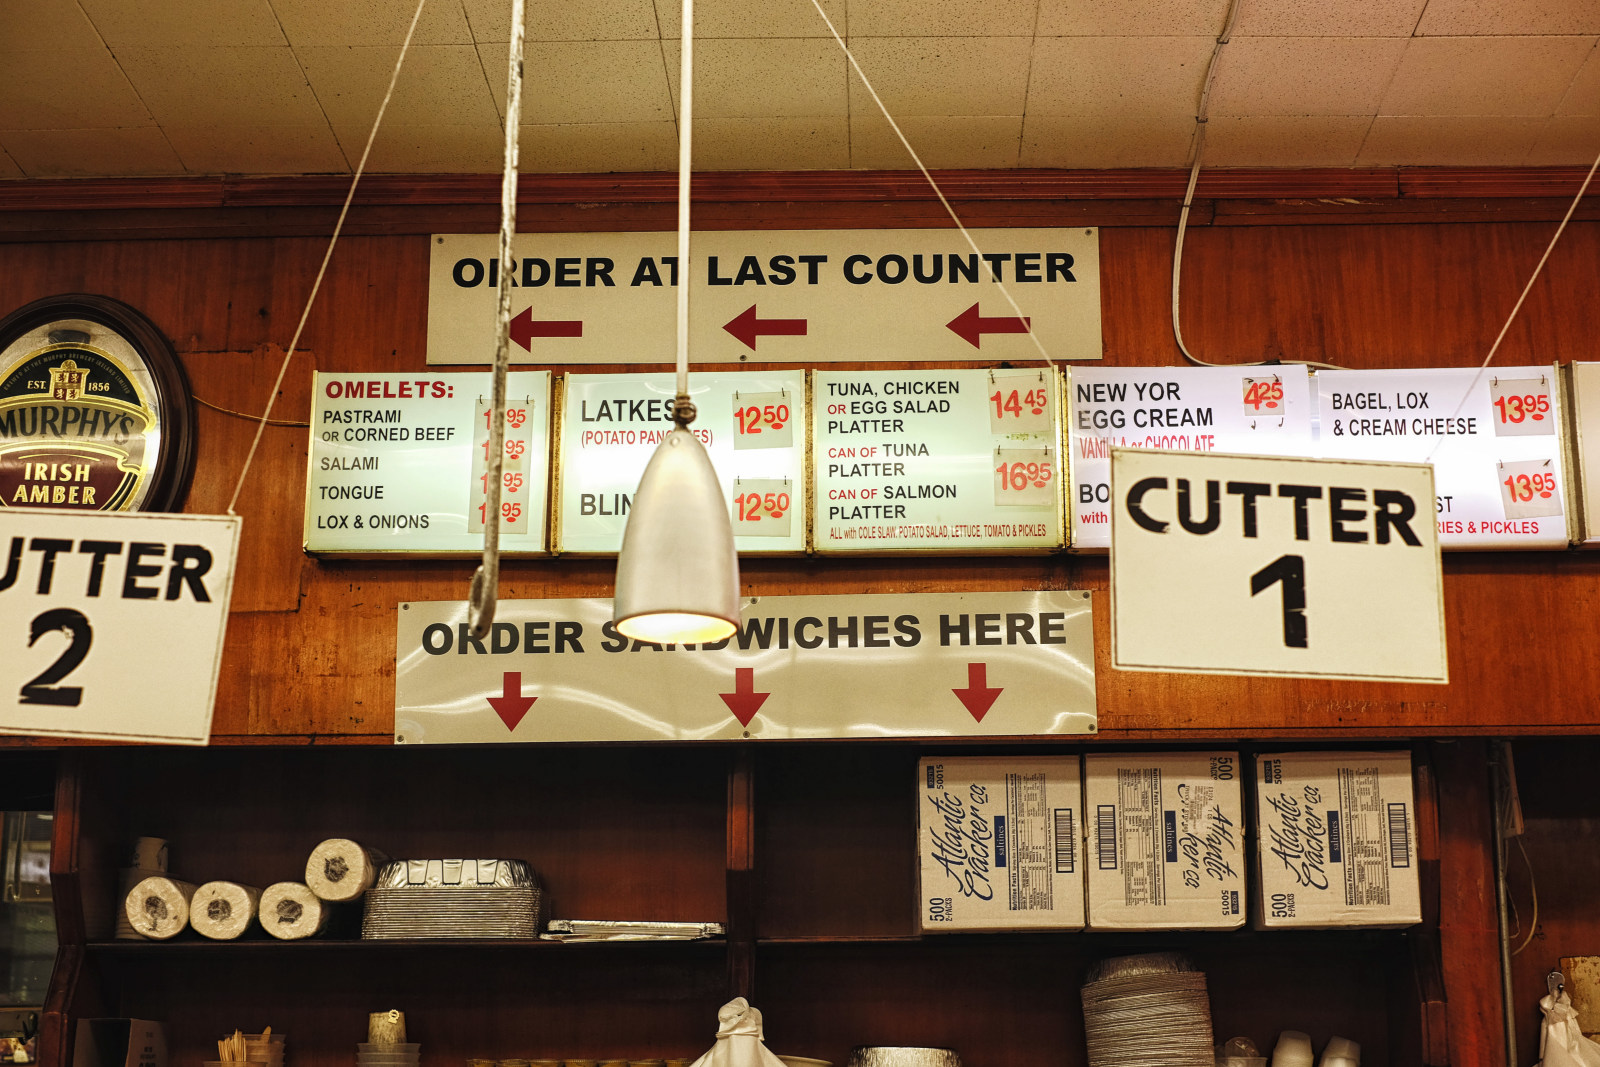 Inside Katz's legendary pastrami, corned beef and Jewish deli, great food and atmosphere on E Houston St, New York